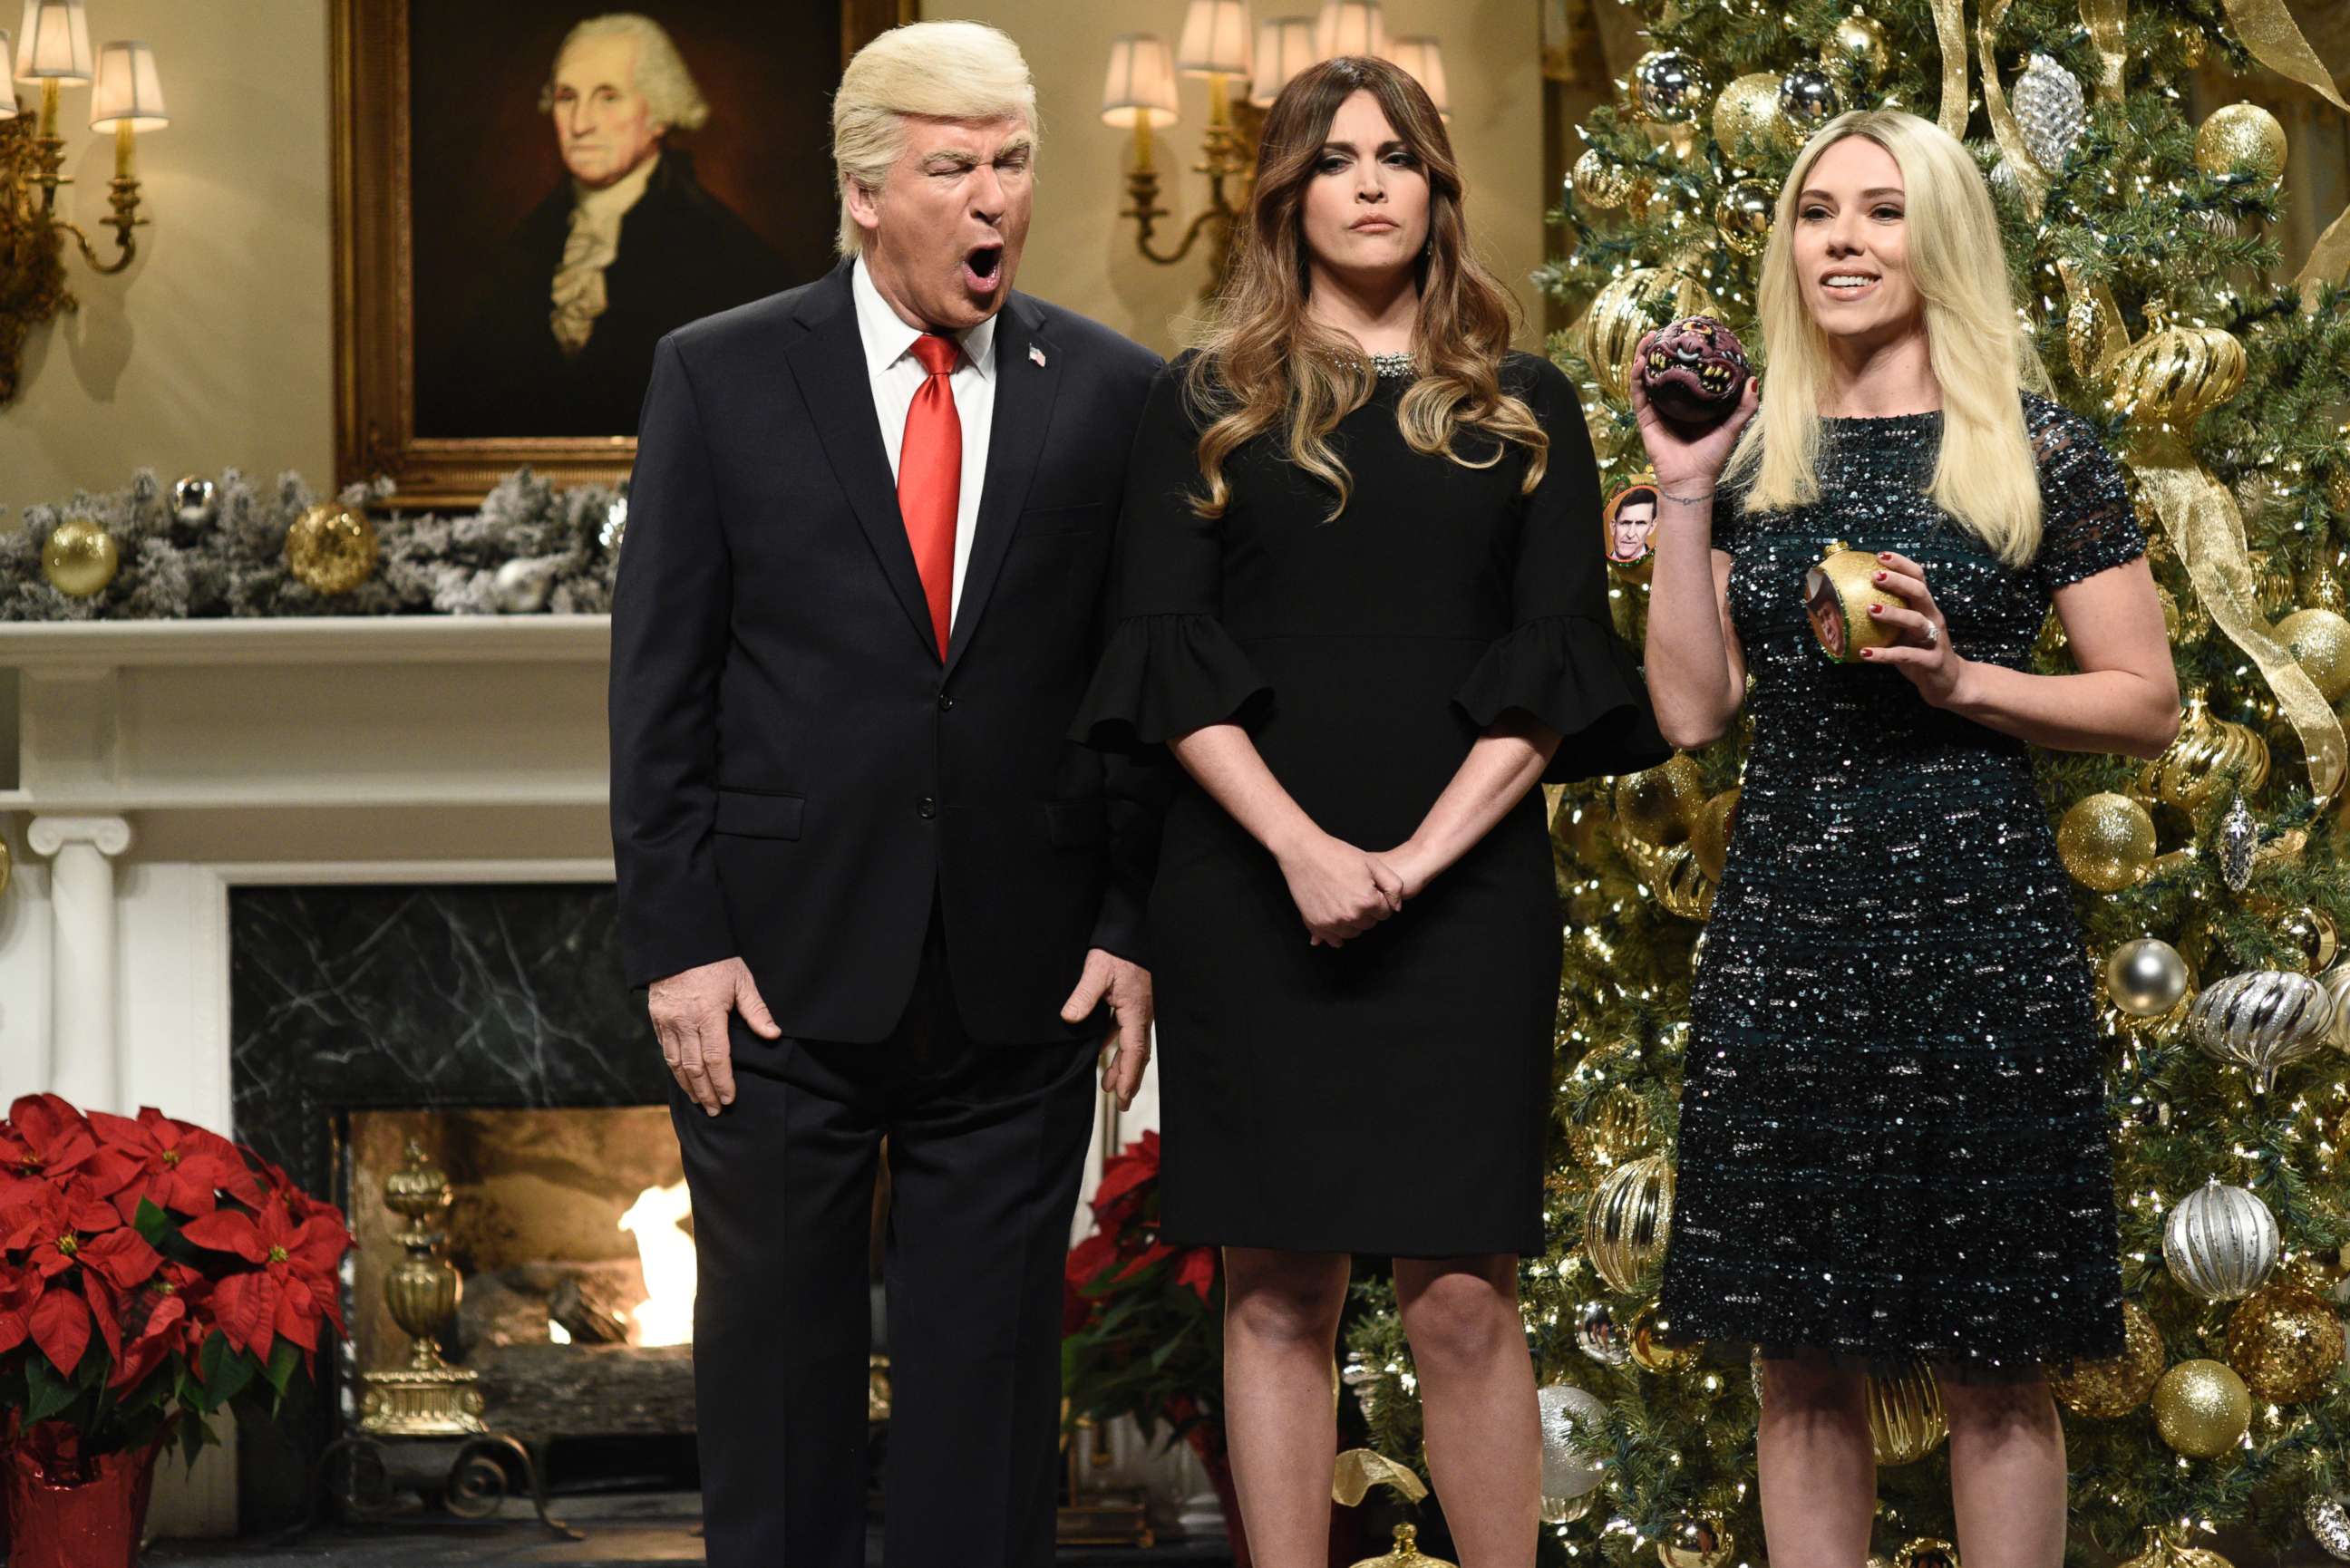 PHOTO: SATURDAY NIGHT LIVE -- Episode 1734 -- Pictured: (l-r) Alec Baldwin as President Donald J. Trump, Cecily Strong as First Lady Melania Trump, Scarlett Johansson as Ivanka Trump on Dec. 16, 2017.